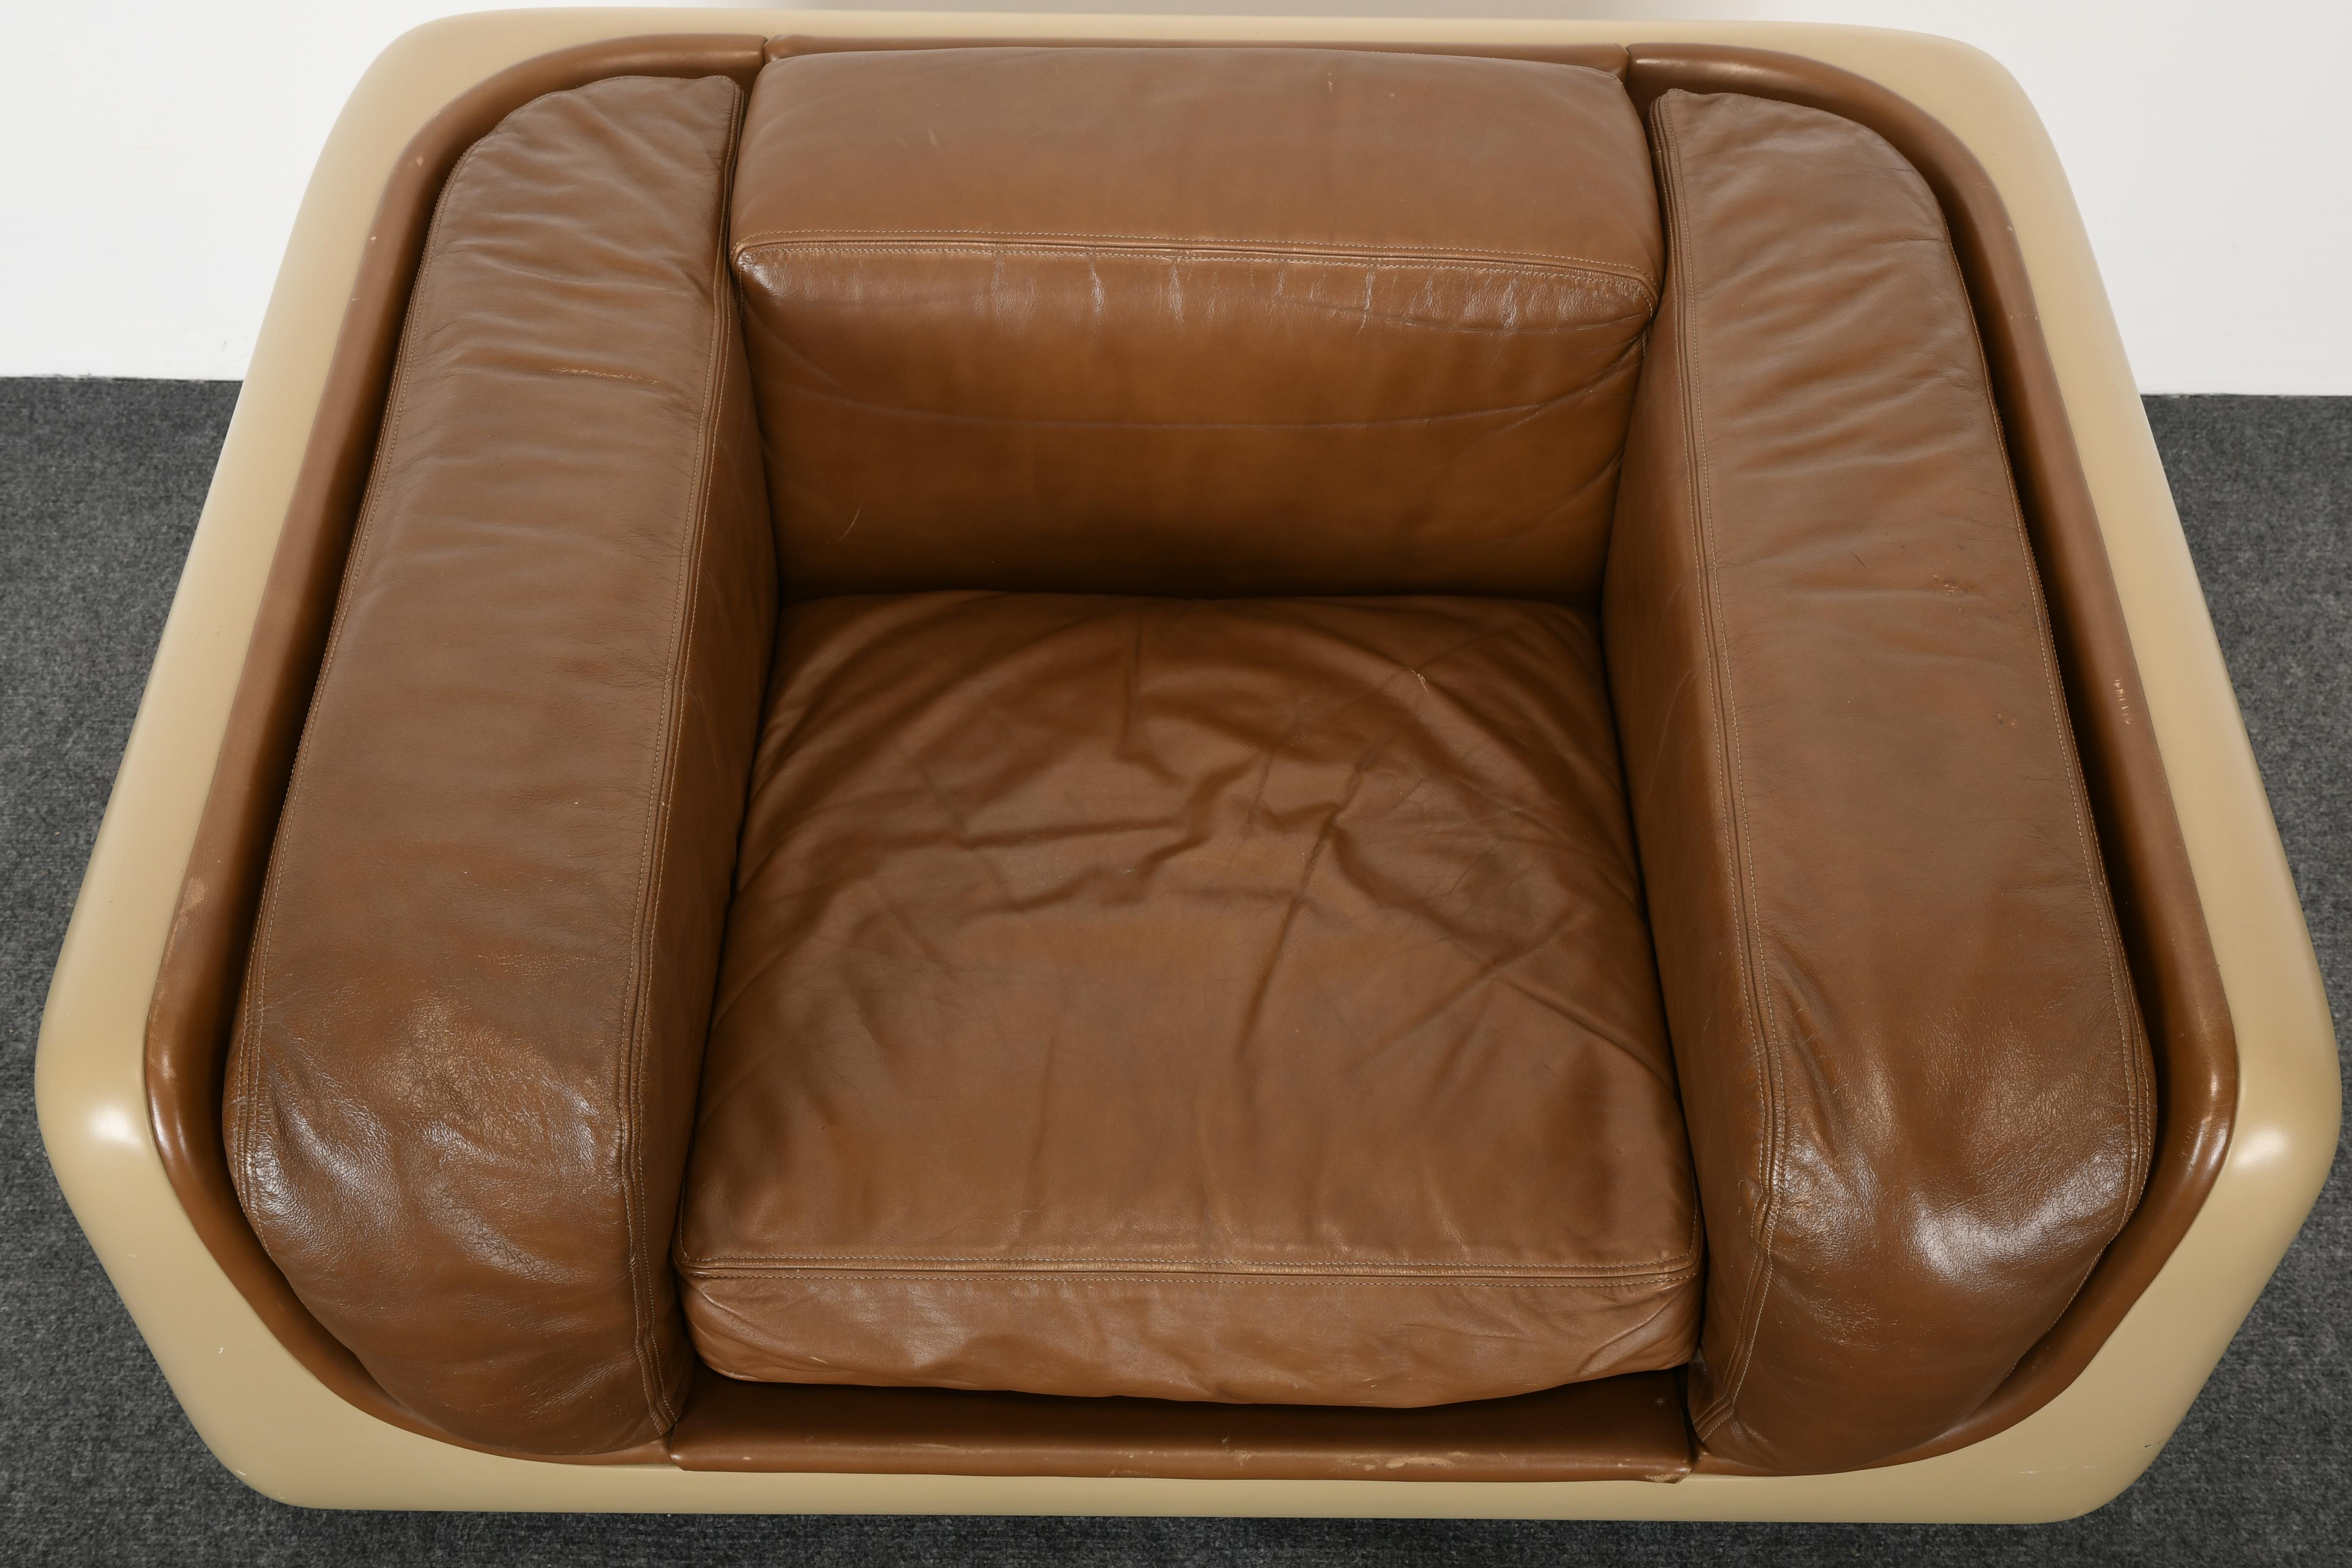 A fiberglass and floating Lucite lounge chair designed by William Andrus, 1970s. Retains original leather seat cushion. Fiberglass has age appropriate wear, one minor hole to leather seat and one pinhole in fiberglass. Labeled Steelcase underside of